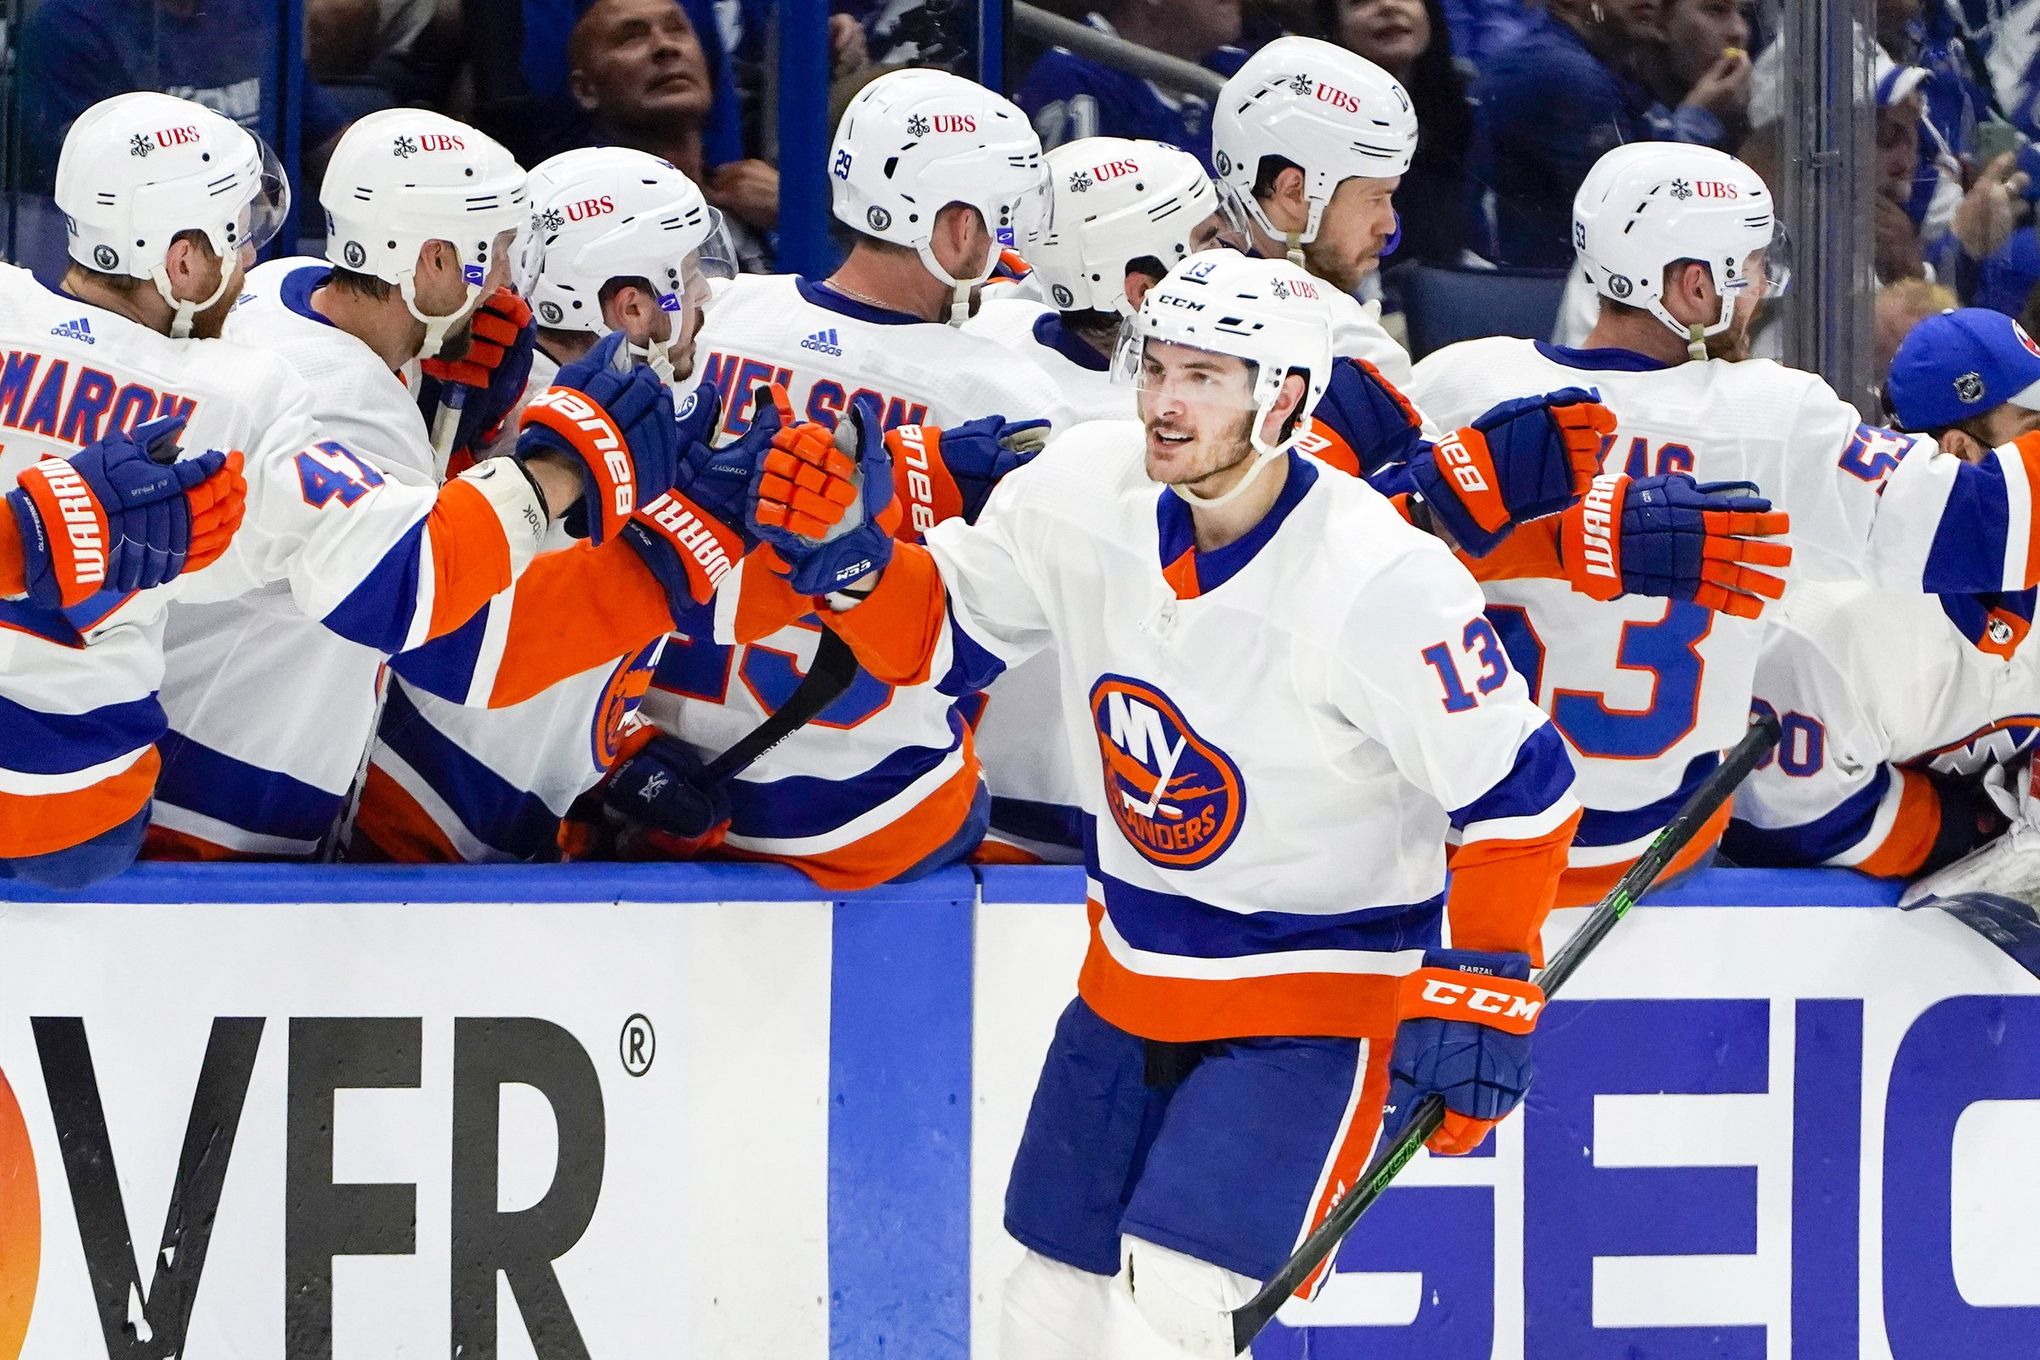 NY Islanders Mathew Barzal plans to play in Game 1 of the Stanley Cup  Playoffs